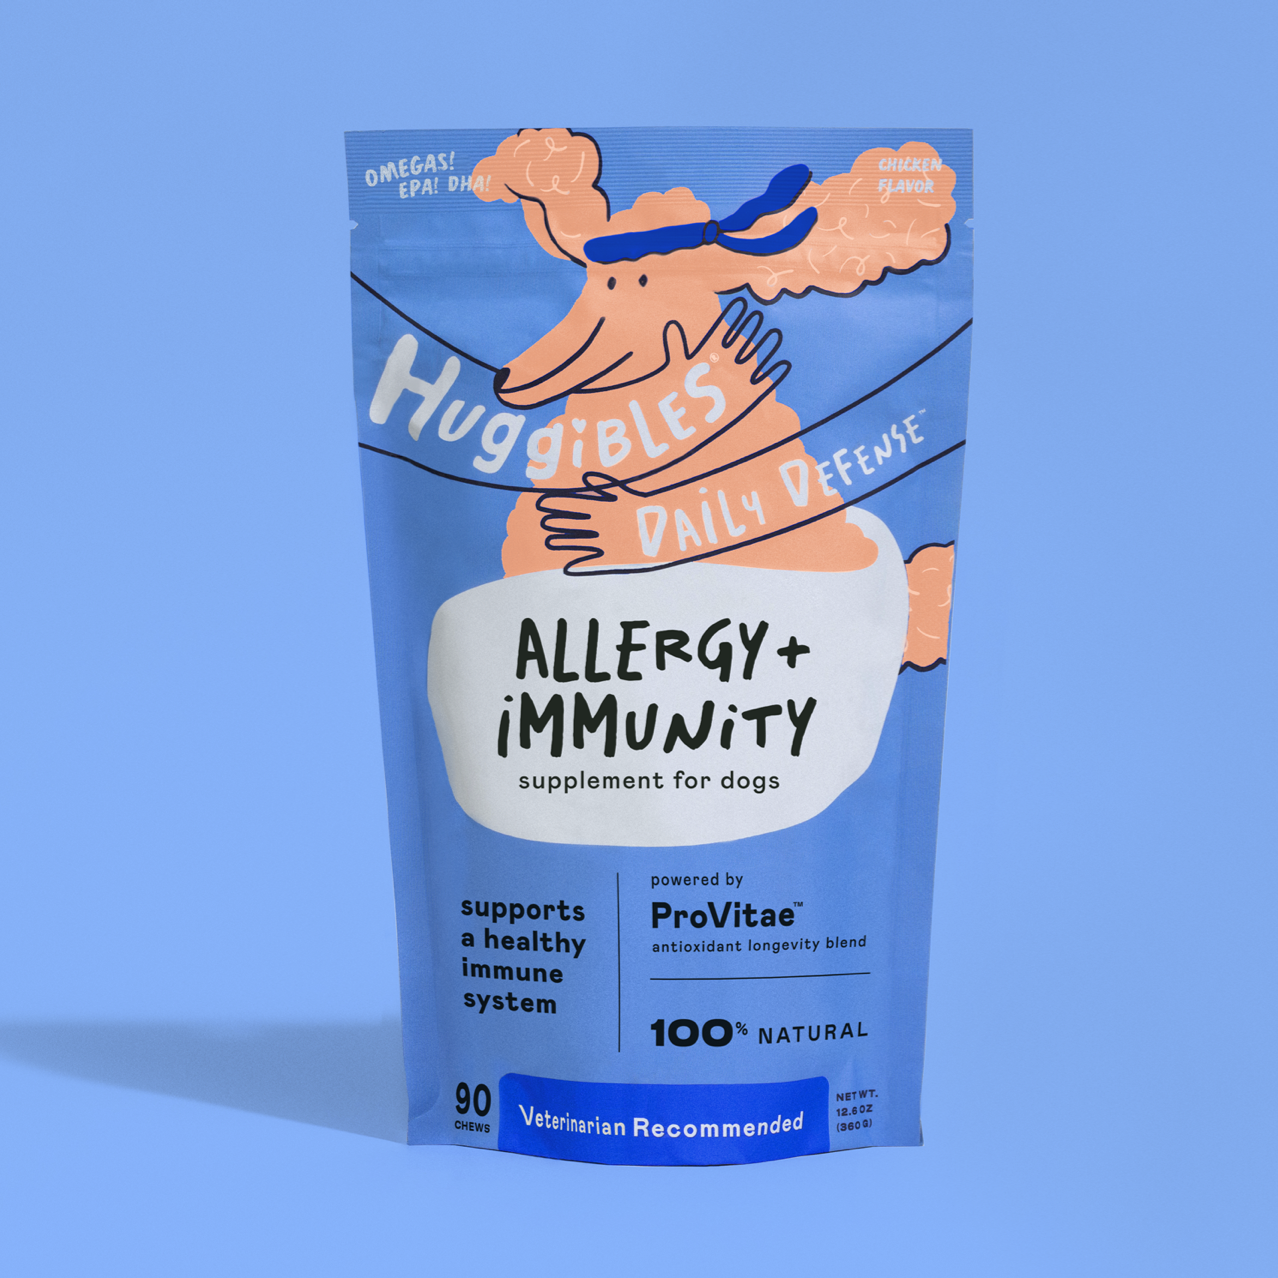 Huggibles_Dog_Supplements_Packaging_Pet_Industry_Pet_Marketing_Branding_Strategy_Allergy_and_Immunity